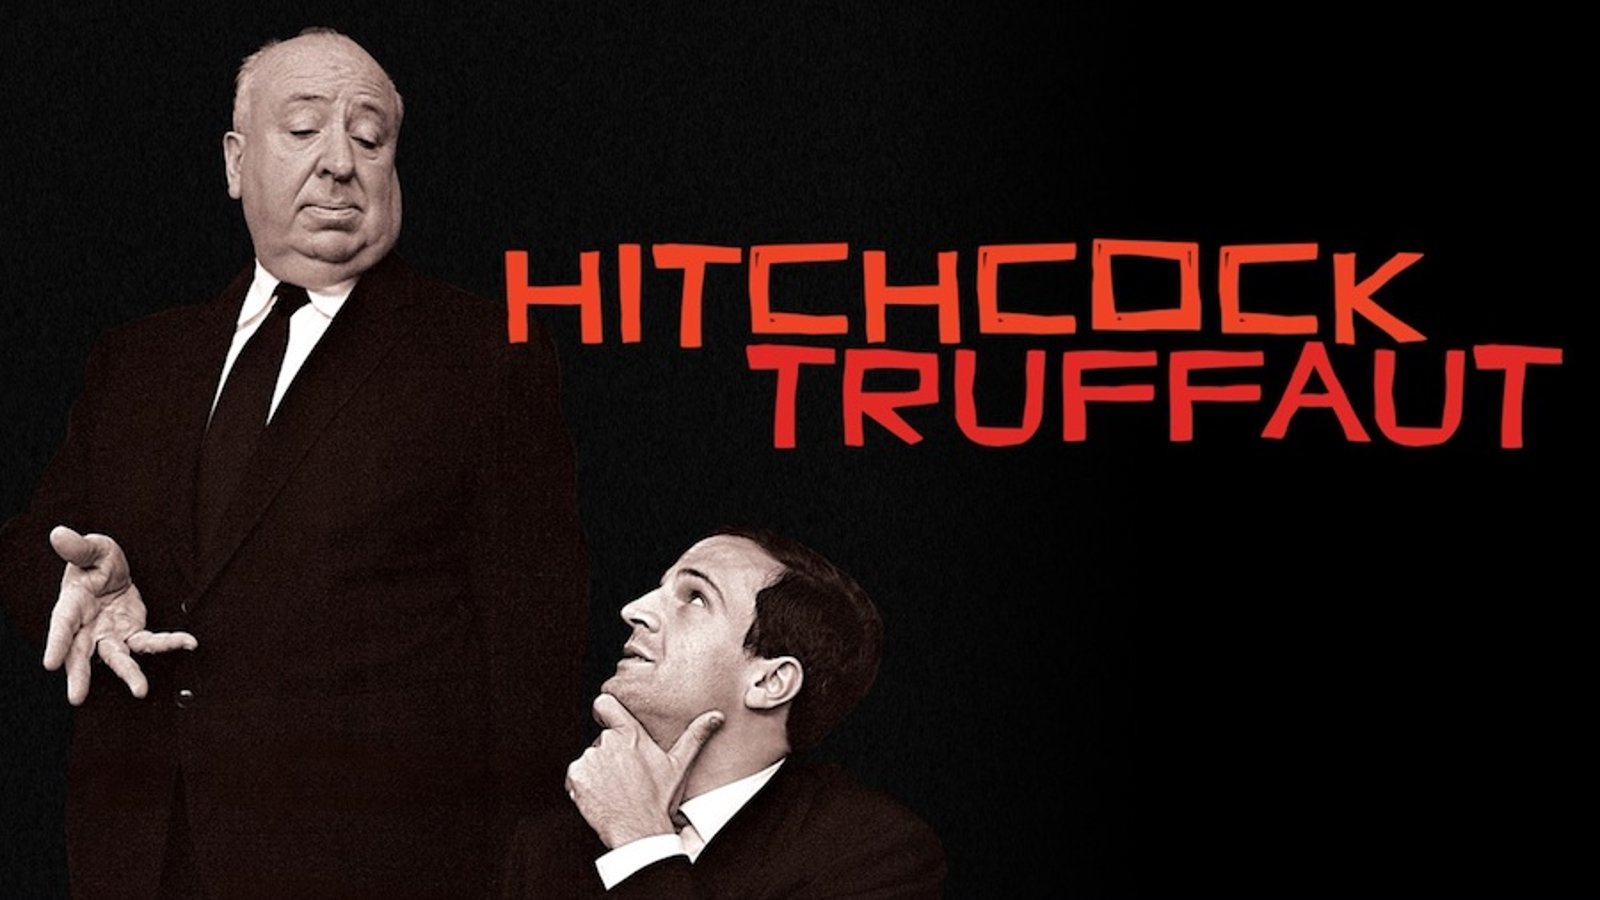 Hitchcock/Truffaut - The Timeless Legacy of Alfred Hitchcock